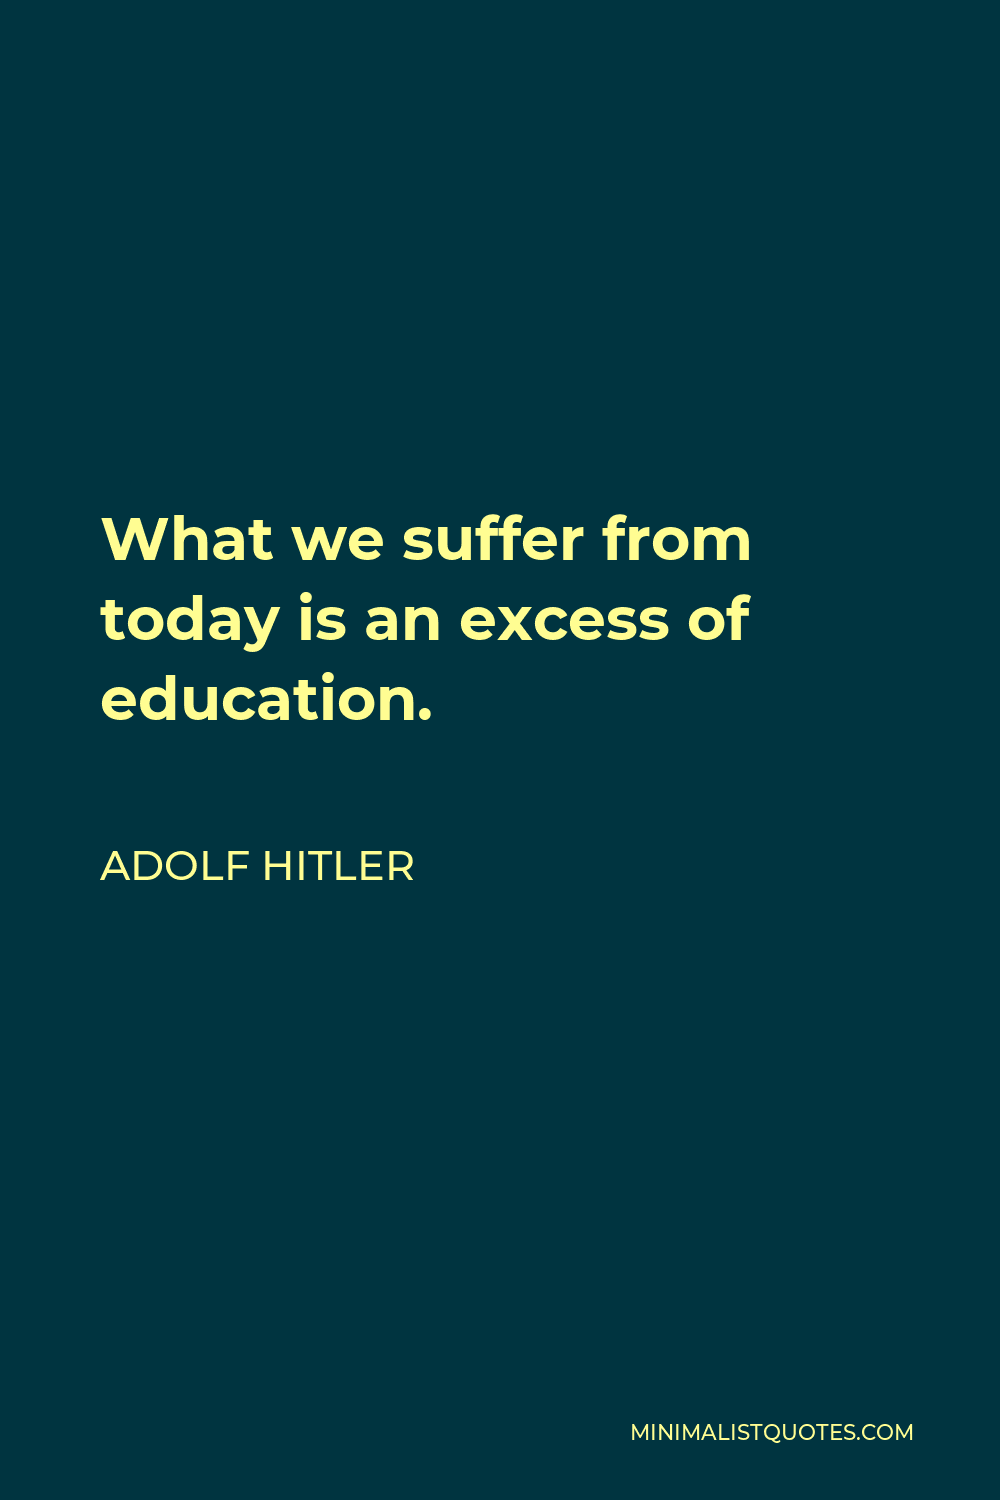 Adolf Hitler Quote: What we suffer from today is an excess of education.